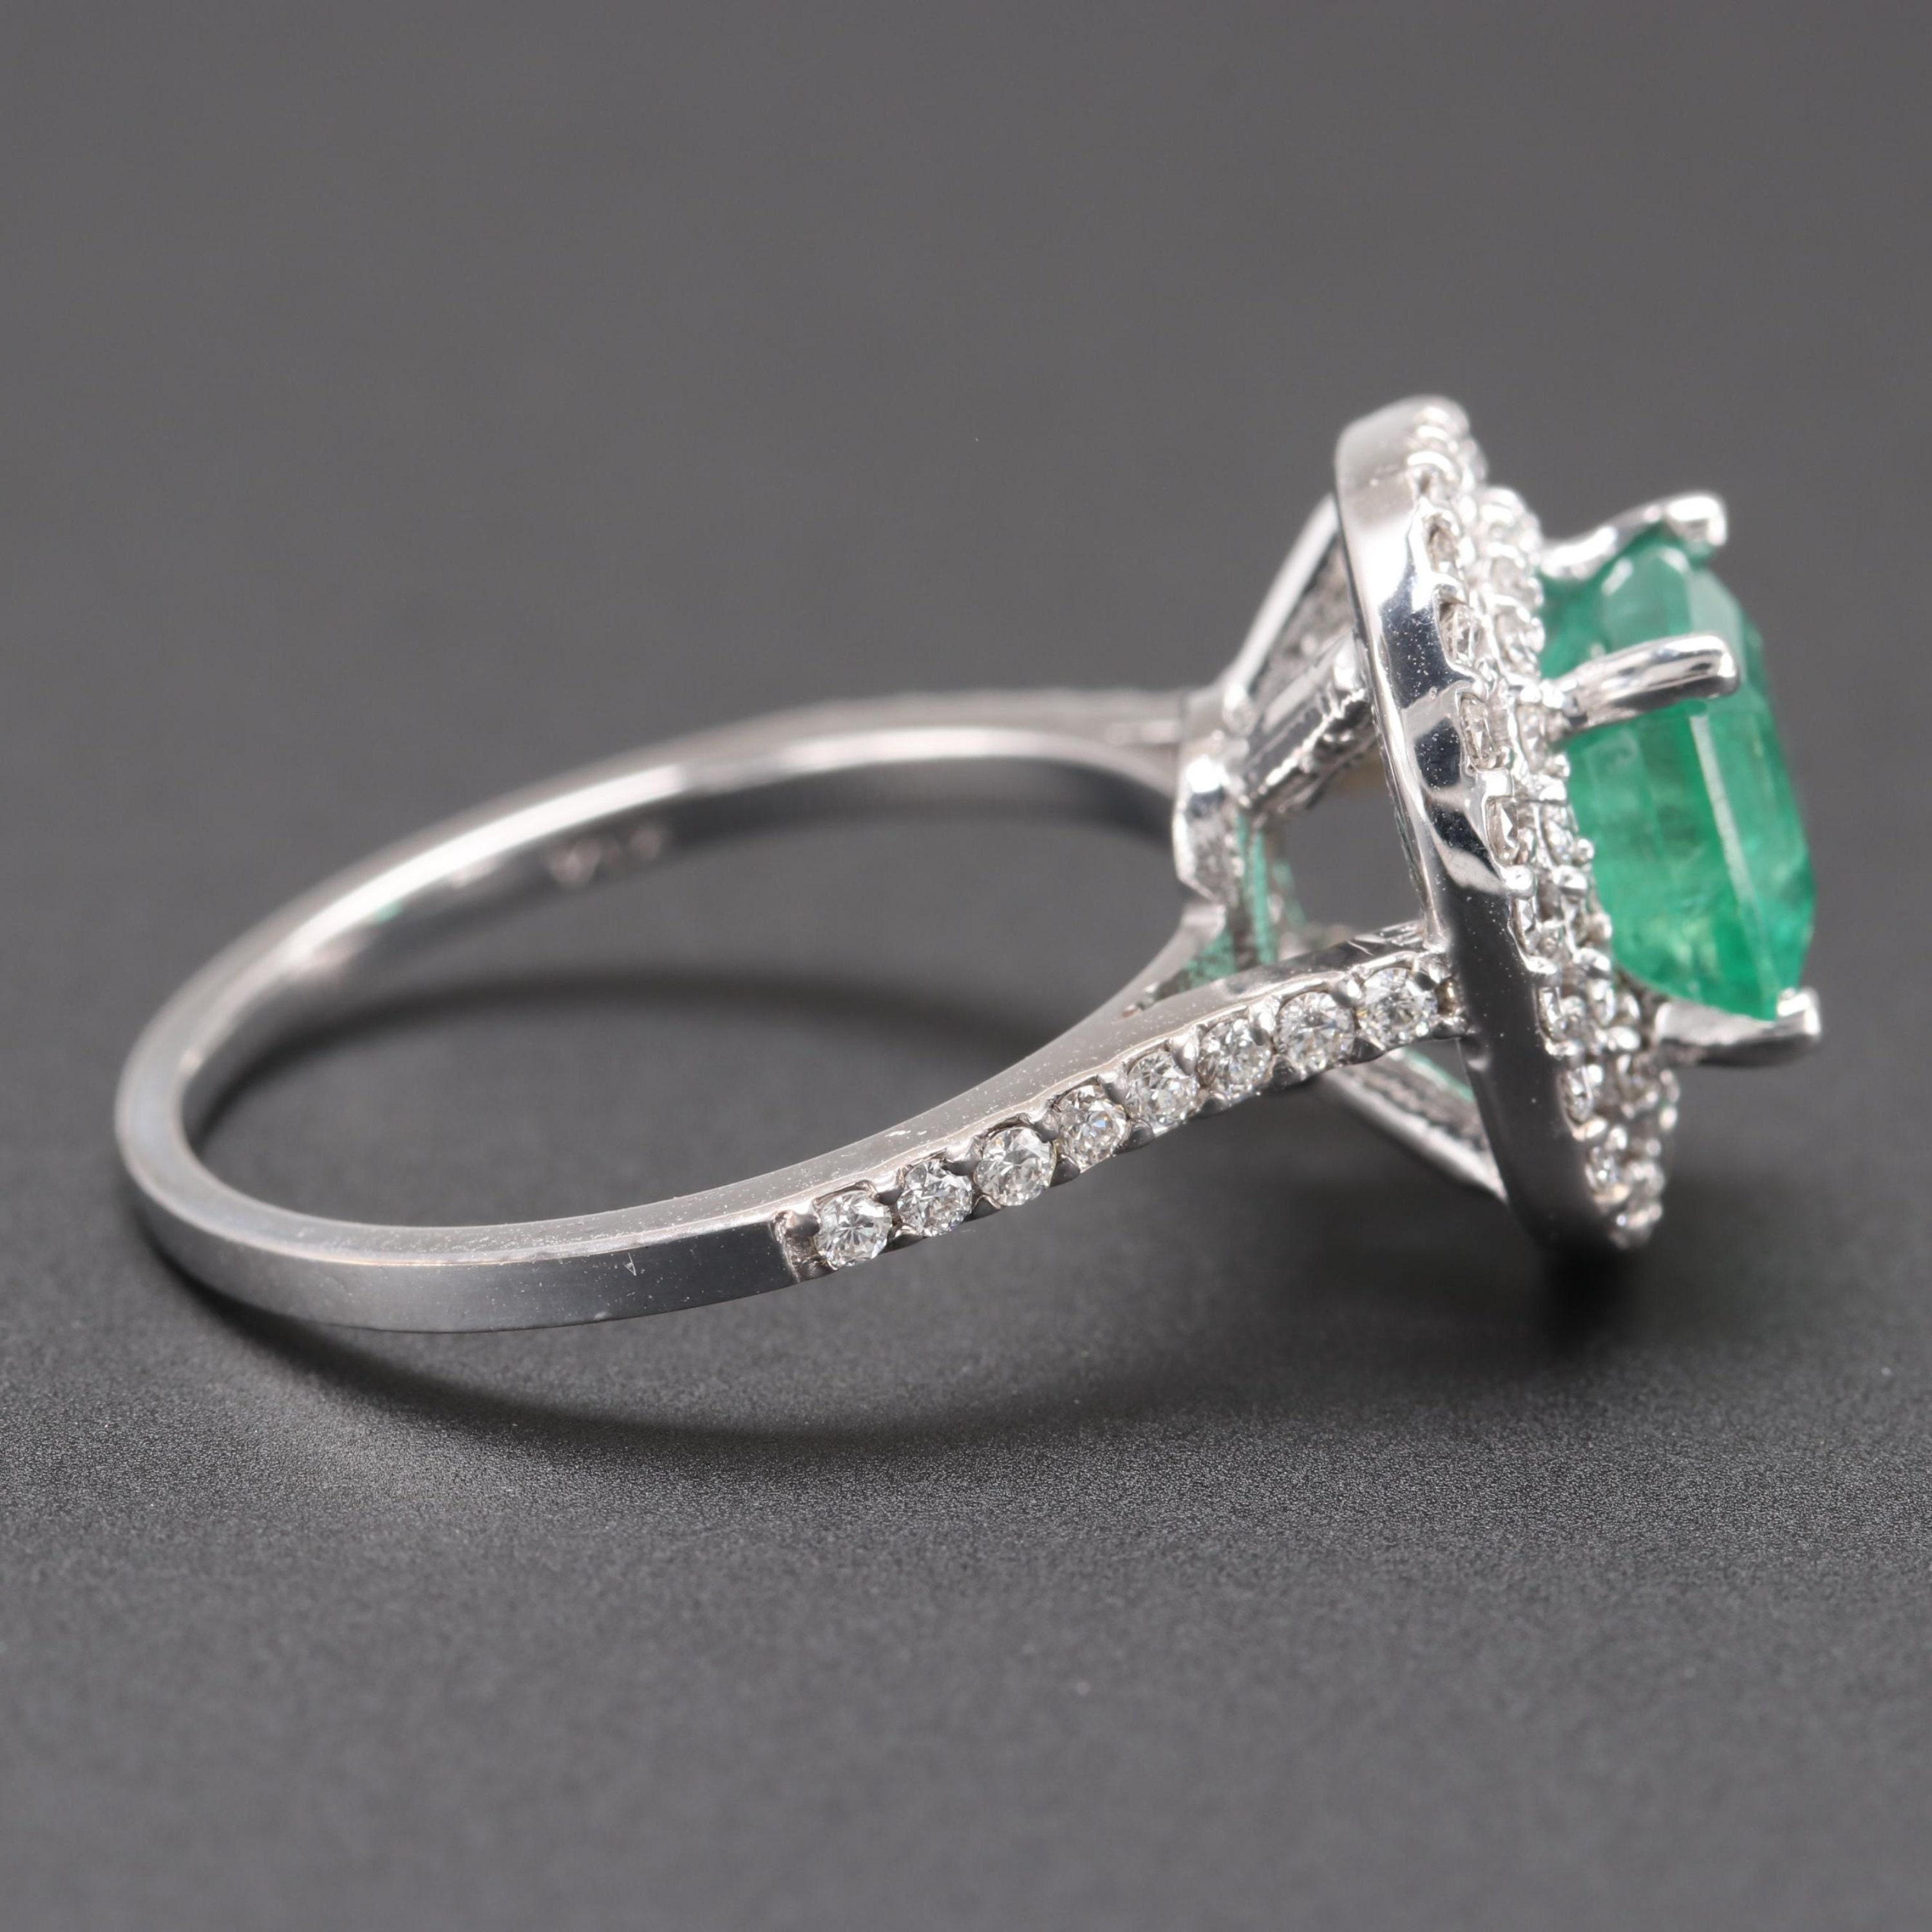 For Sale:  Art Deco Natural Emerald Diamond Engagement Ring Set in 18K Gold, Cocktail Ring 3